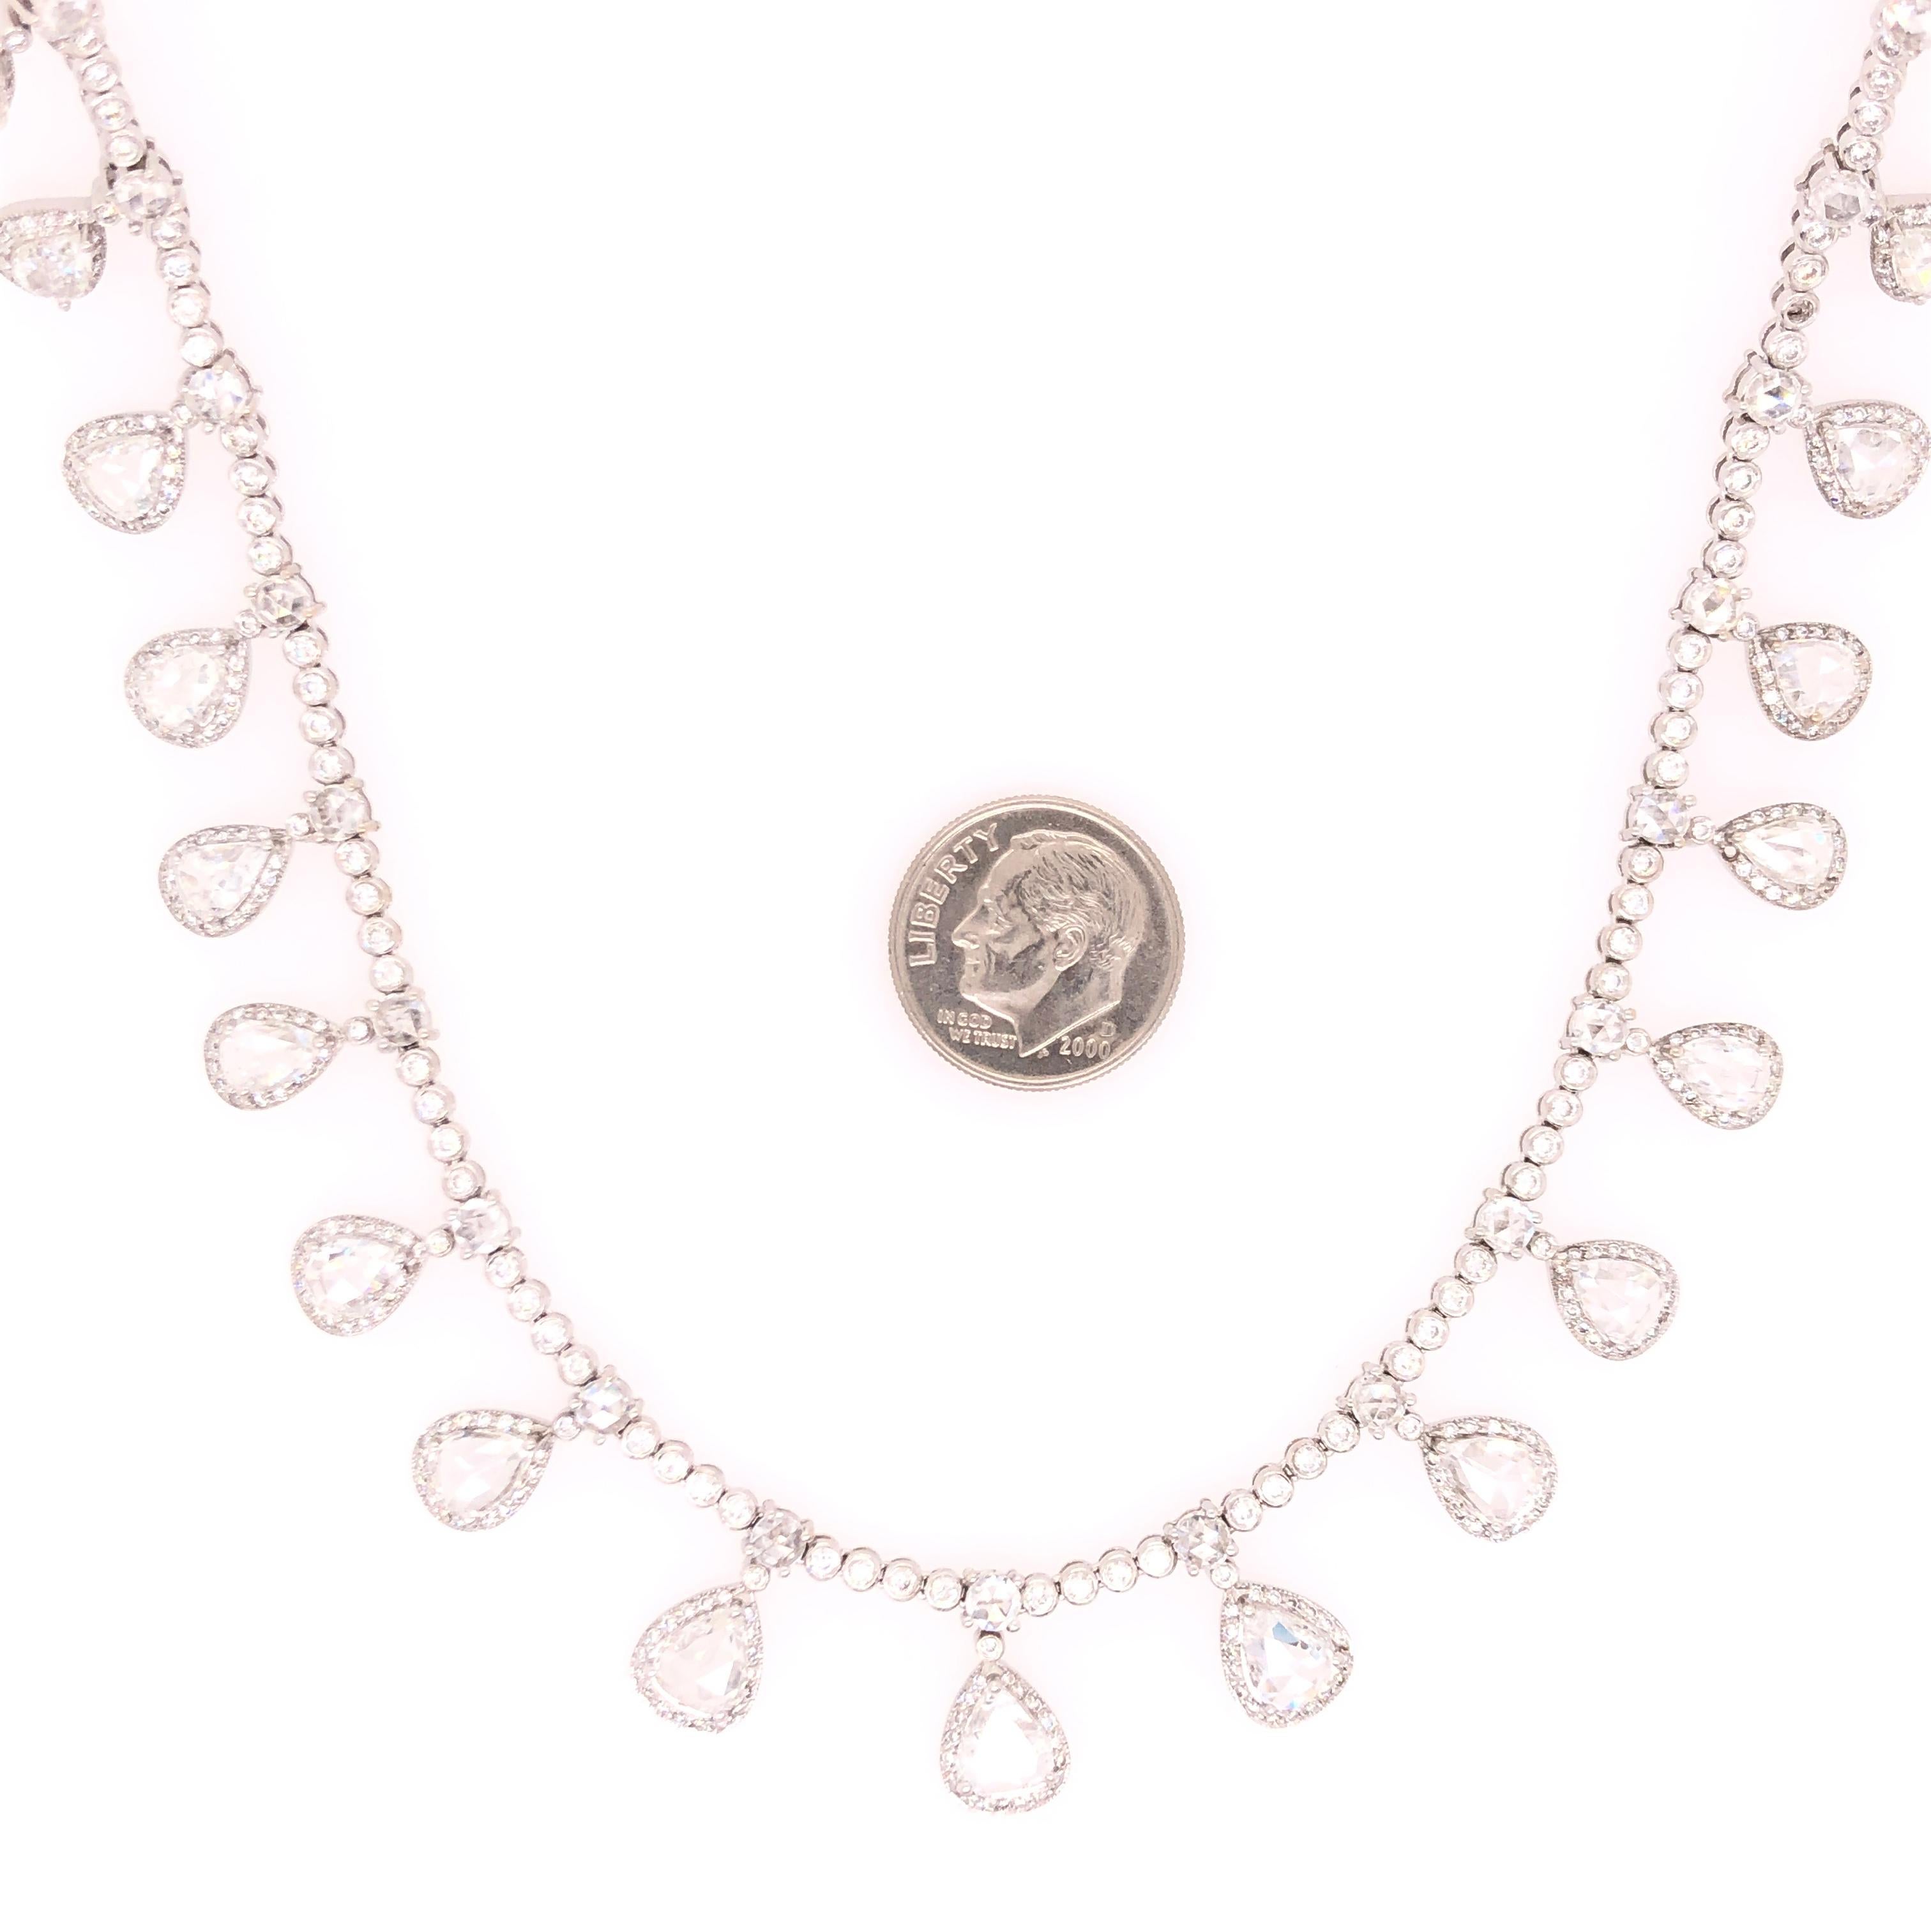 Elegant and sophisticated this lovely 18 karat white gold diamond necklace is sure to enchant all those that look upon it. 

An estimated 10 CTS of diamonds shine brilliantly from their settings. With the optional extender, the necklace is 18